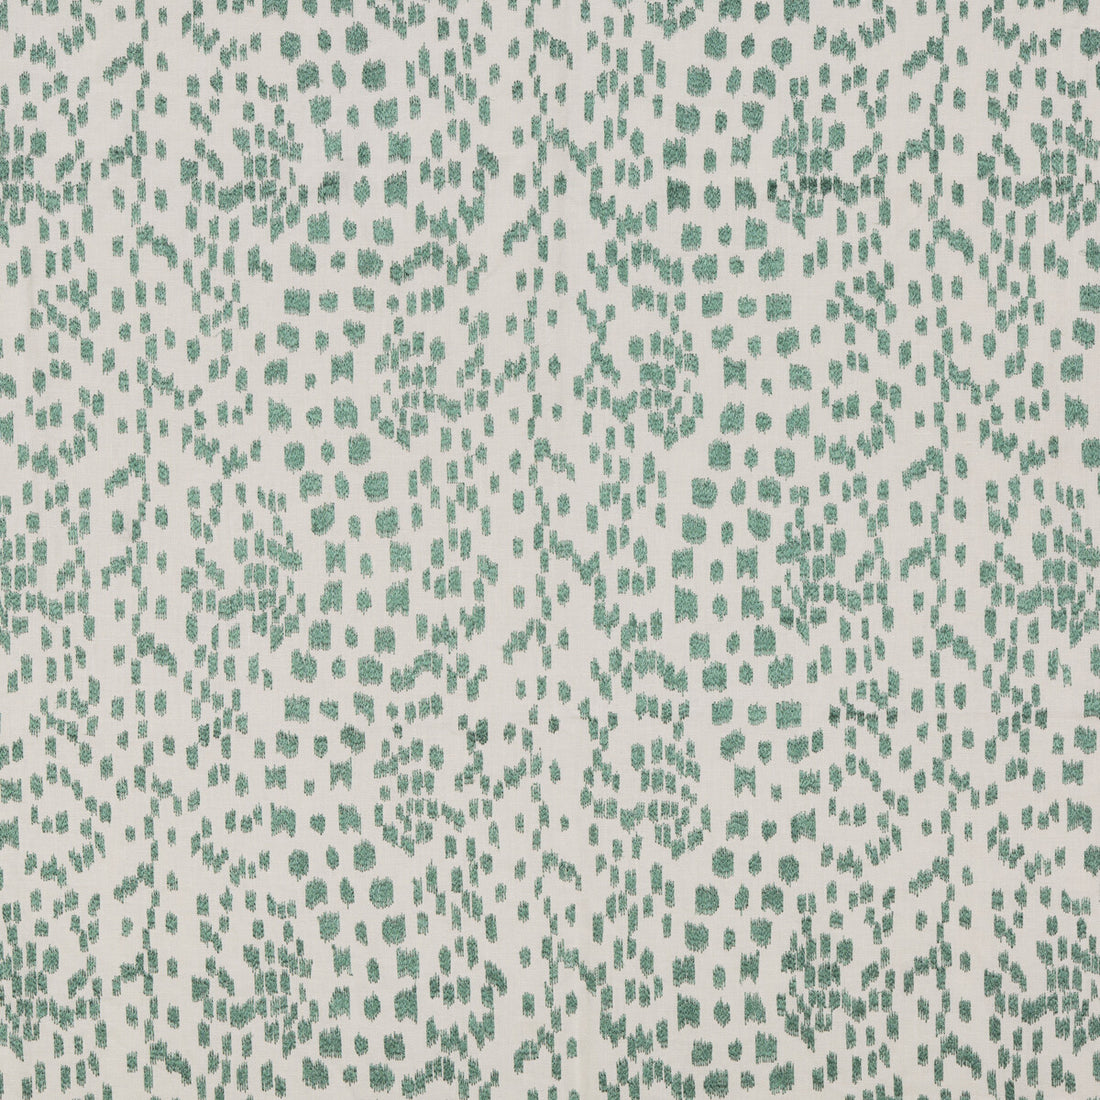 Les Touches Emb fabric in jade color - pattern 8015168.35.0 - by Brunschwig &amp; Fils in the Cape Comorin collection